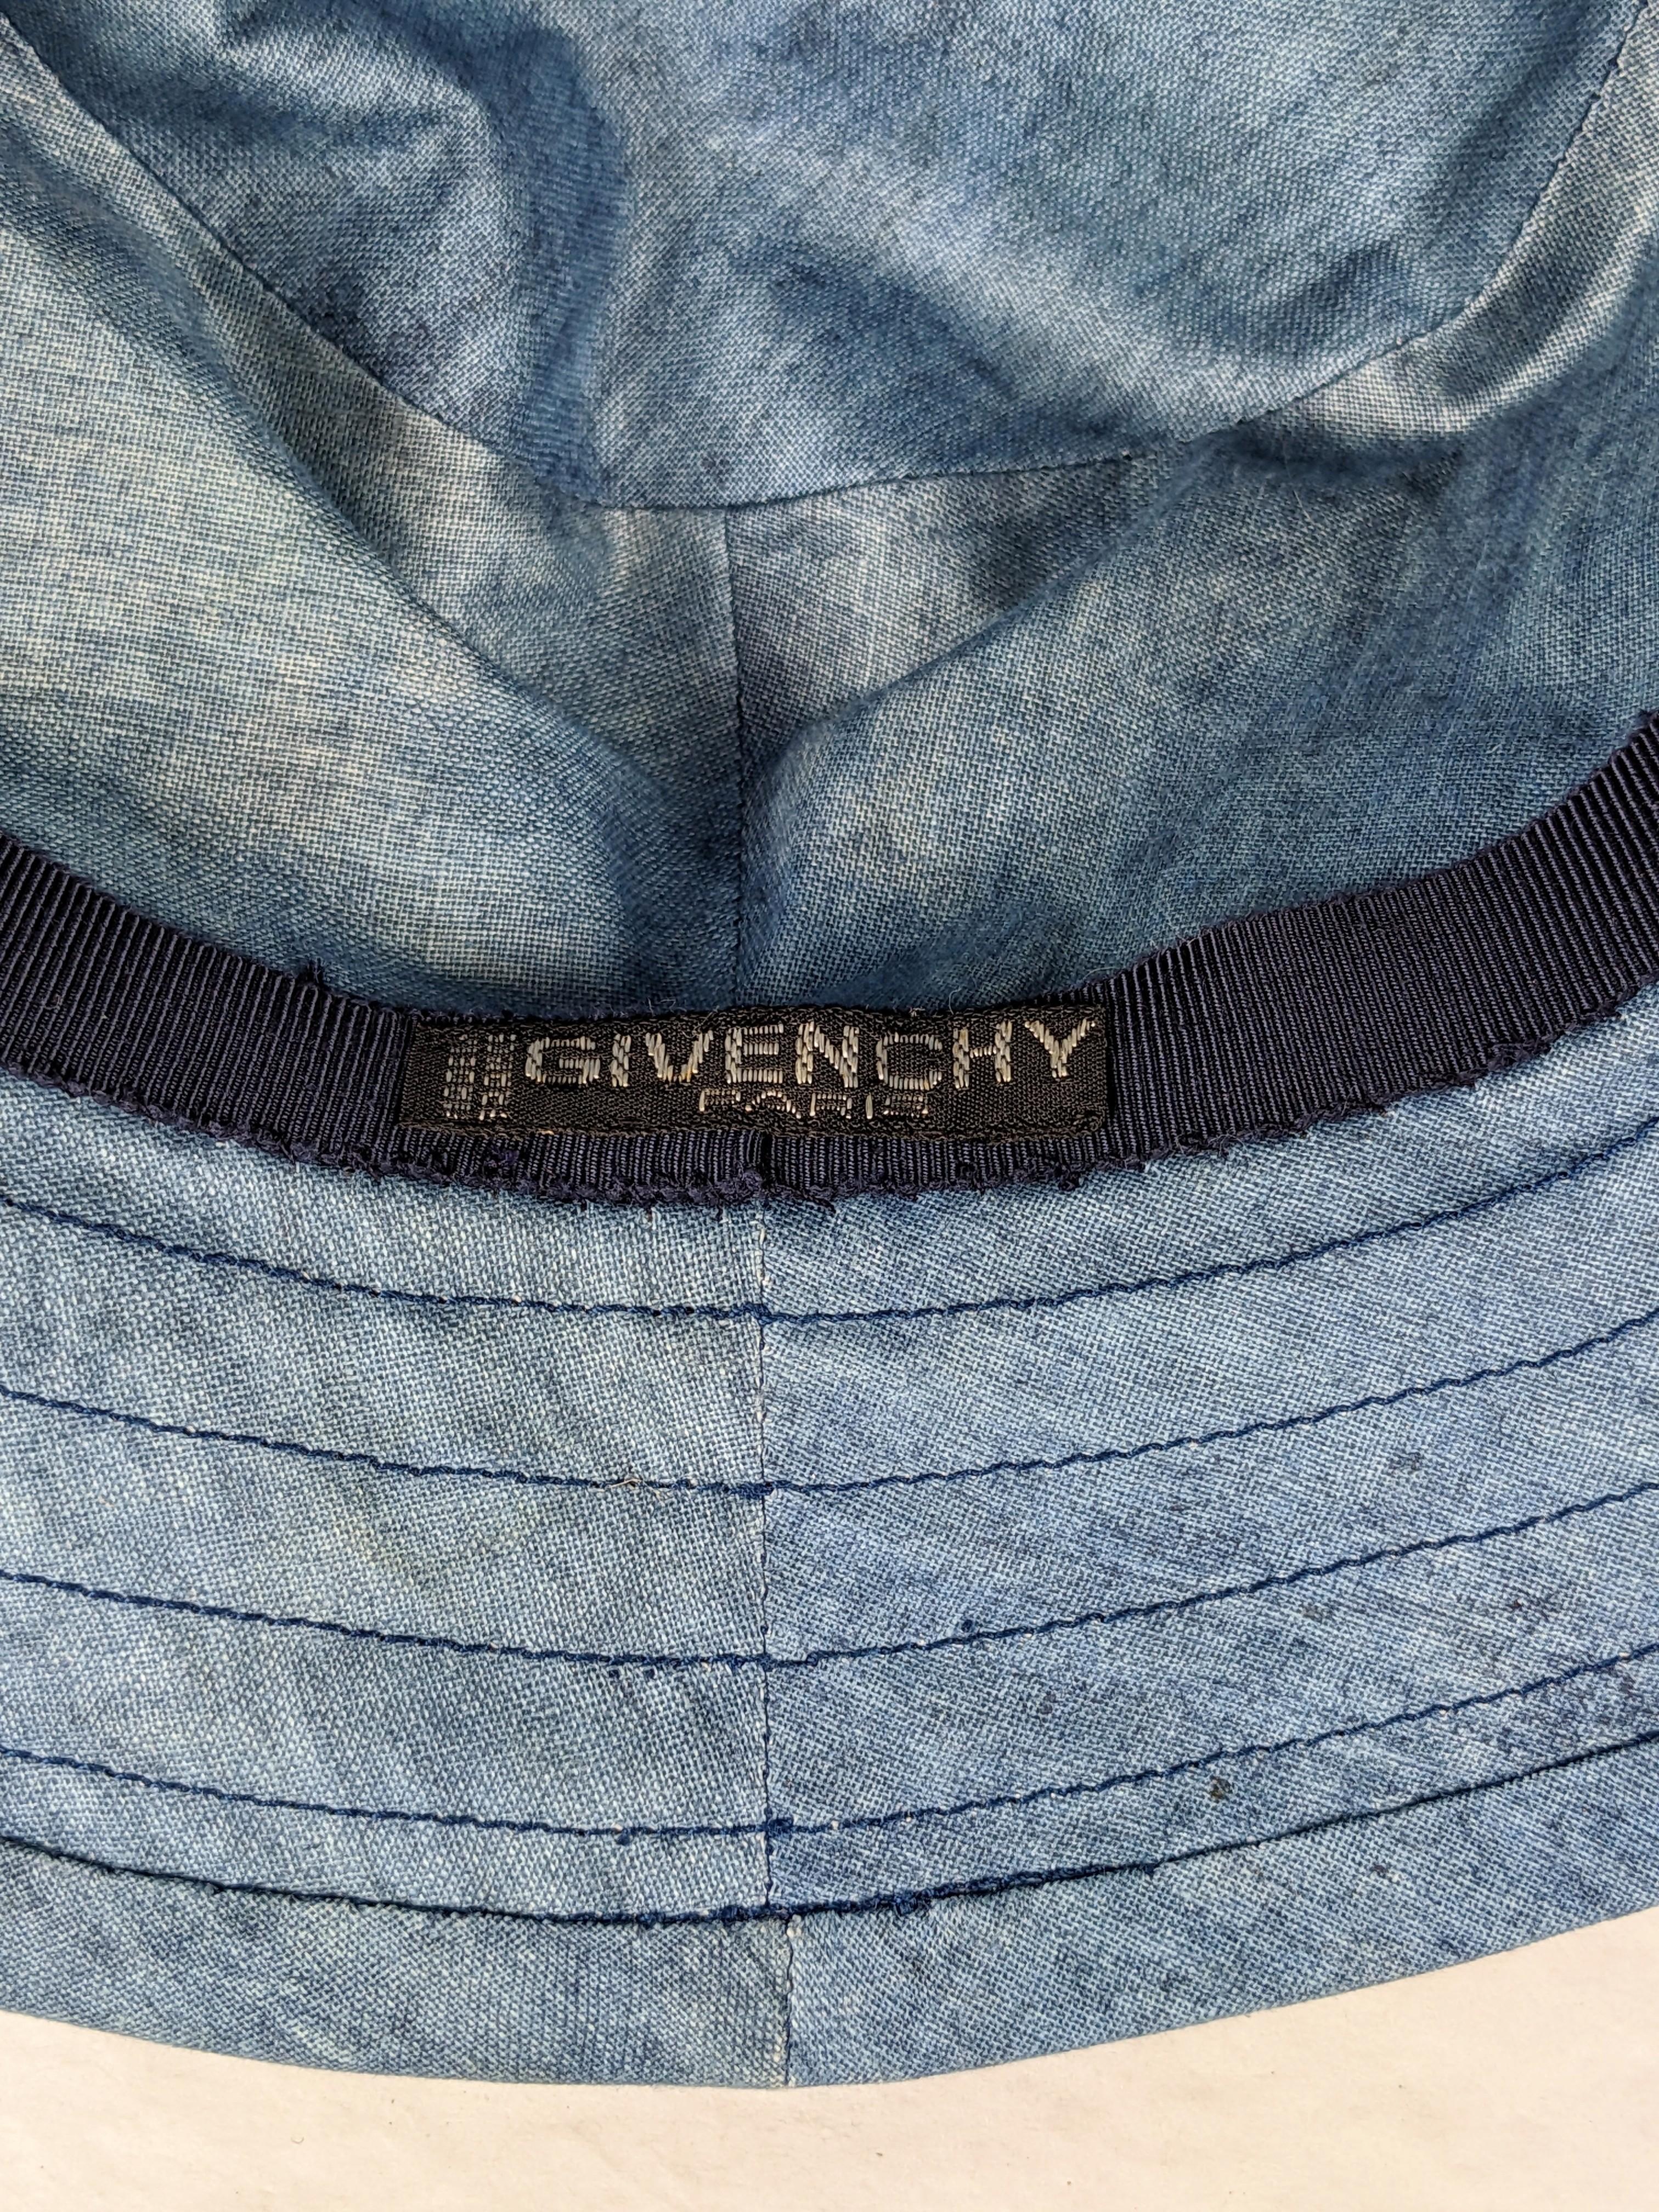 Givenchy Haute Couture Gardening Hat, Bunny Mellon 3